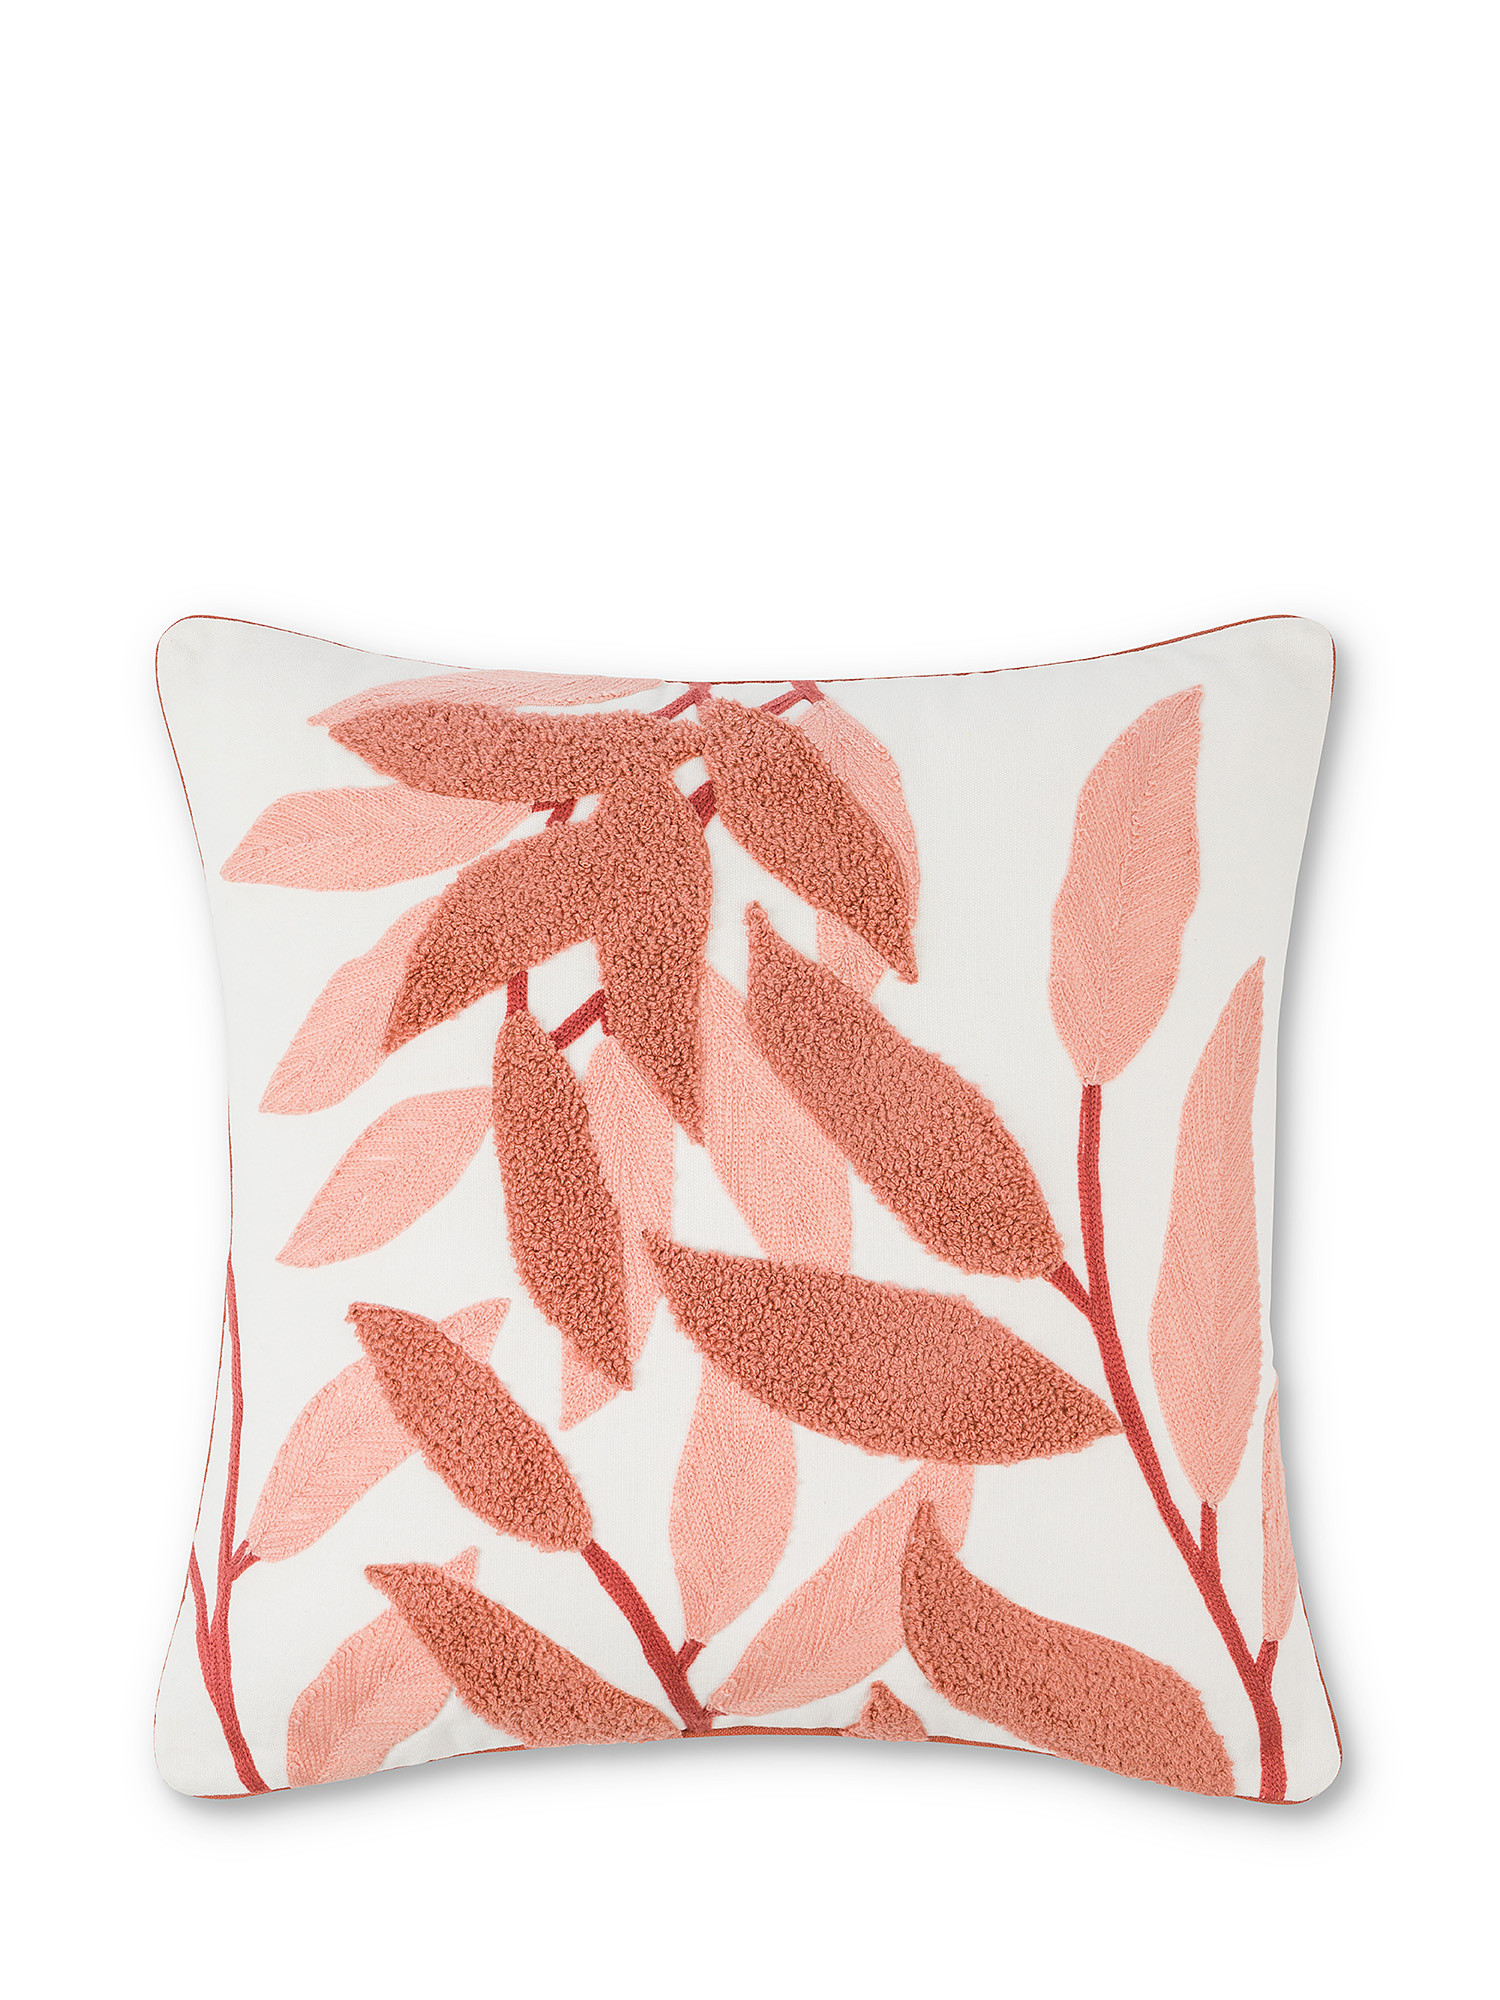 Leaves embroidered cotton cushion 45x45cm, White, large image number 0